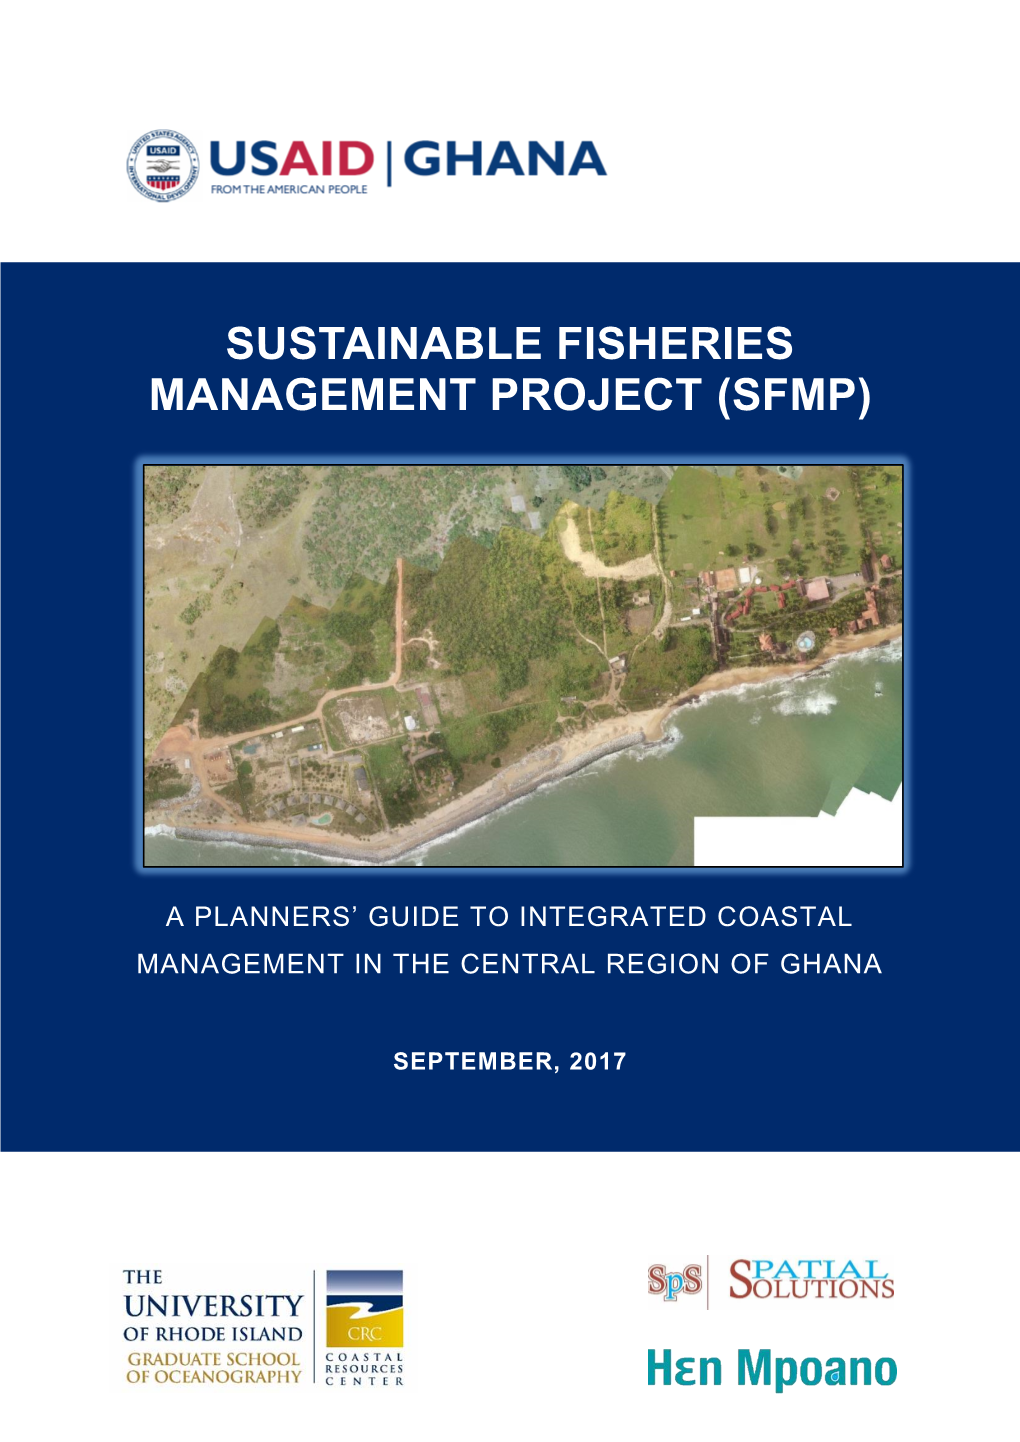 A Planners' Guide to Integrated Coastal Management in the Central